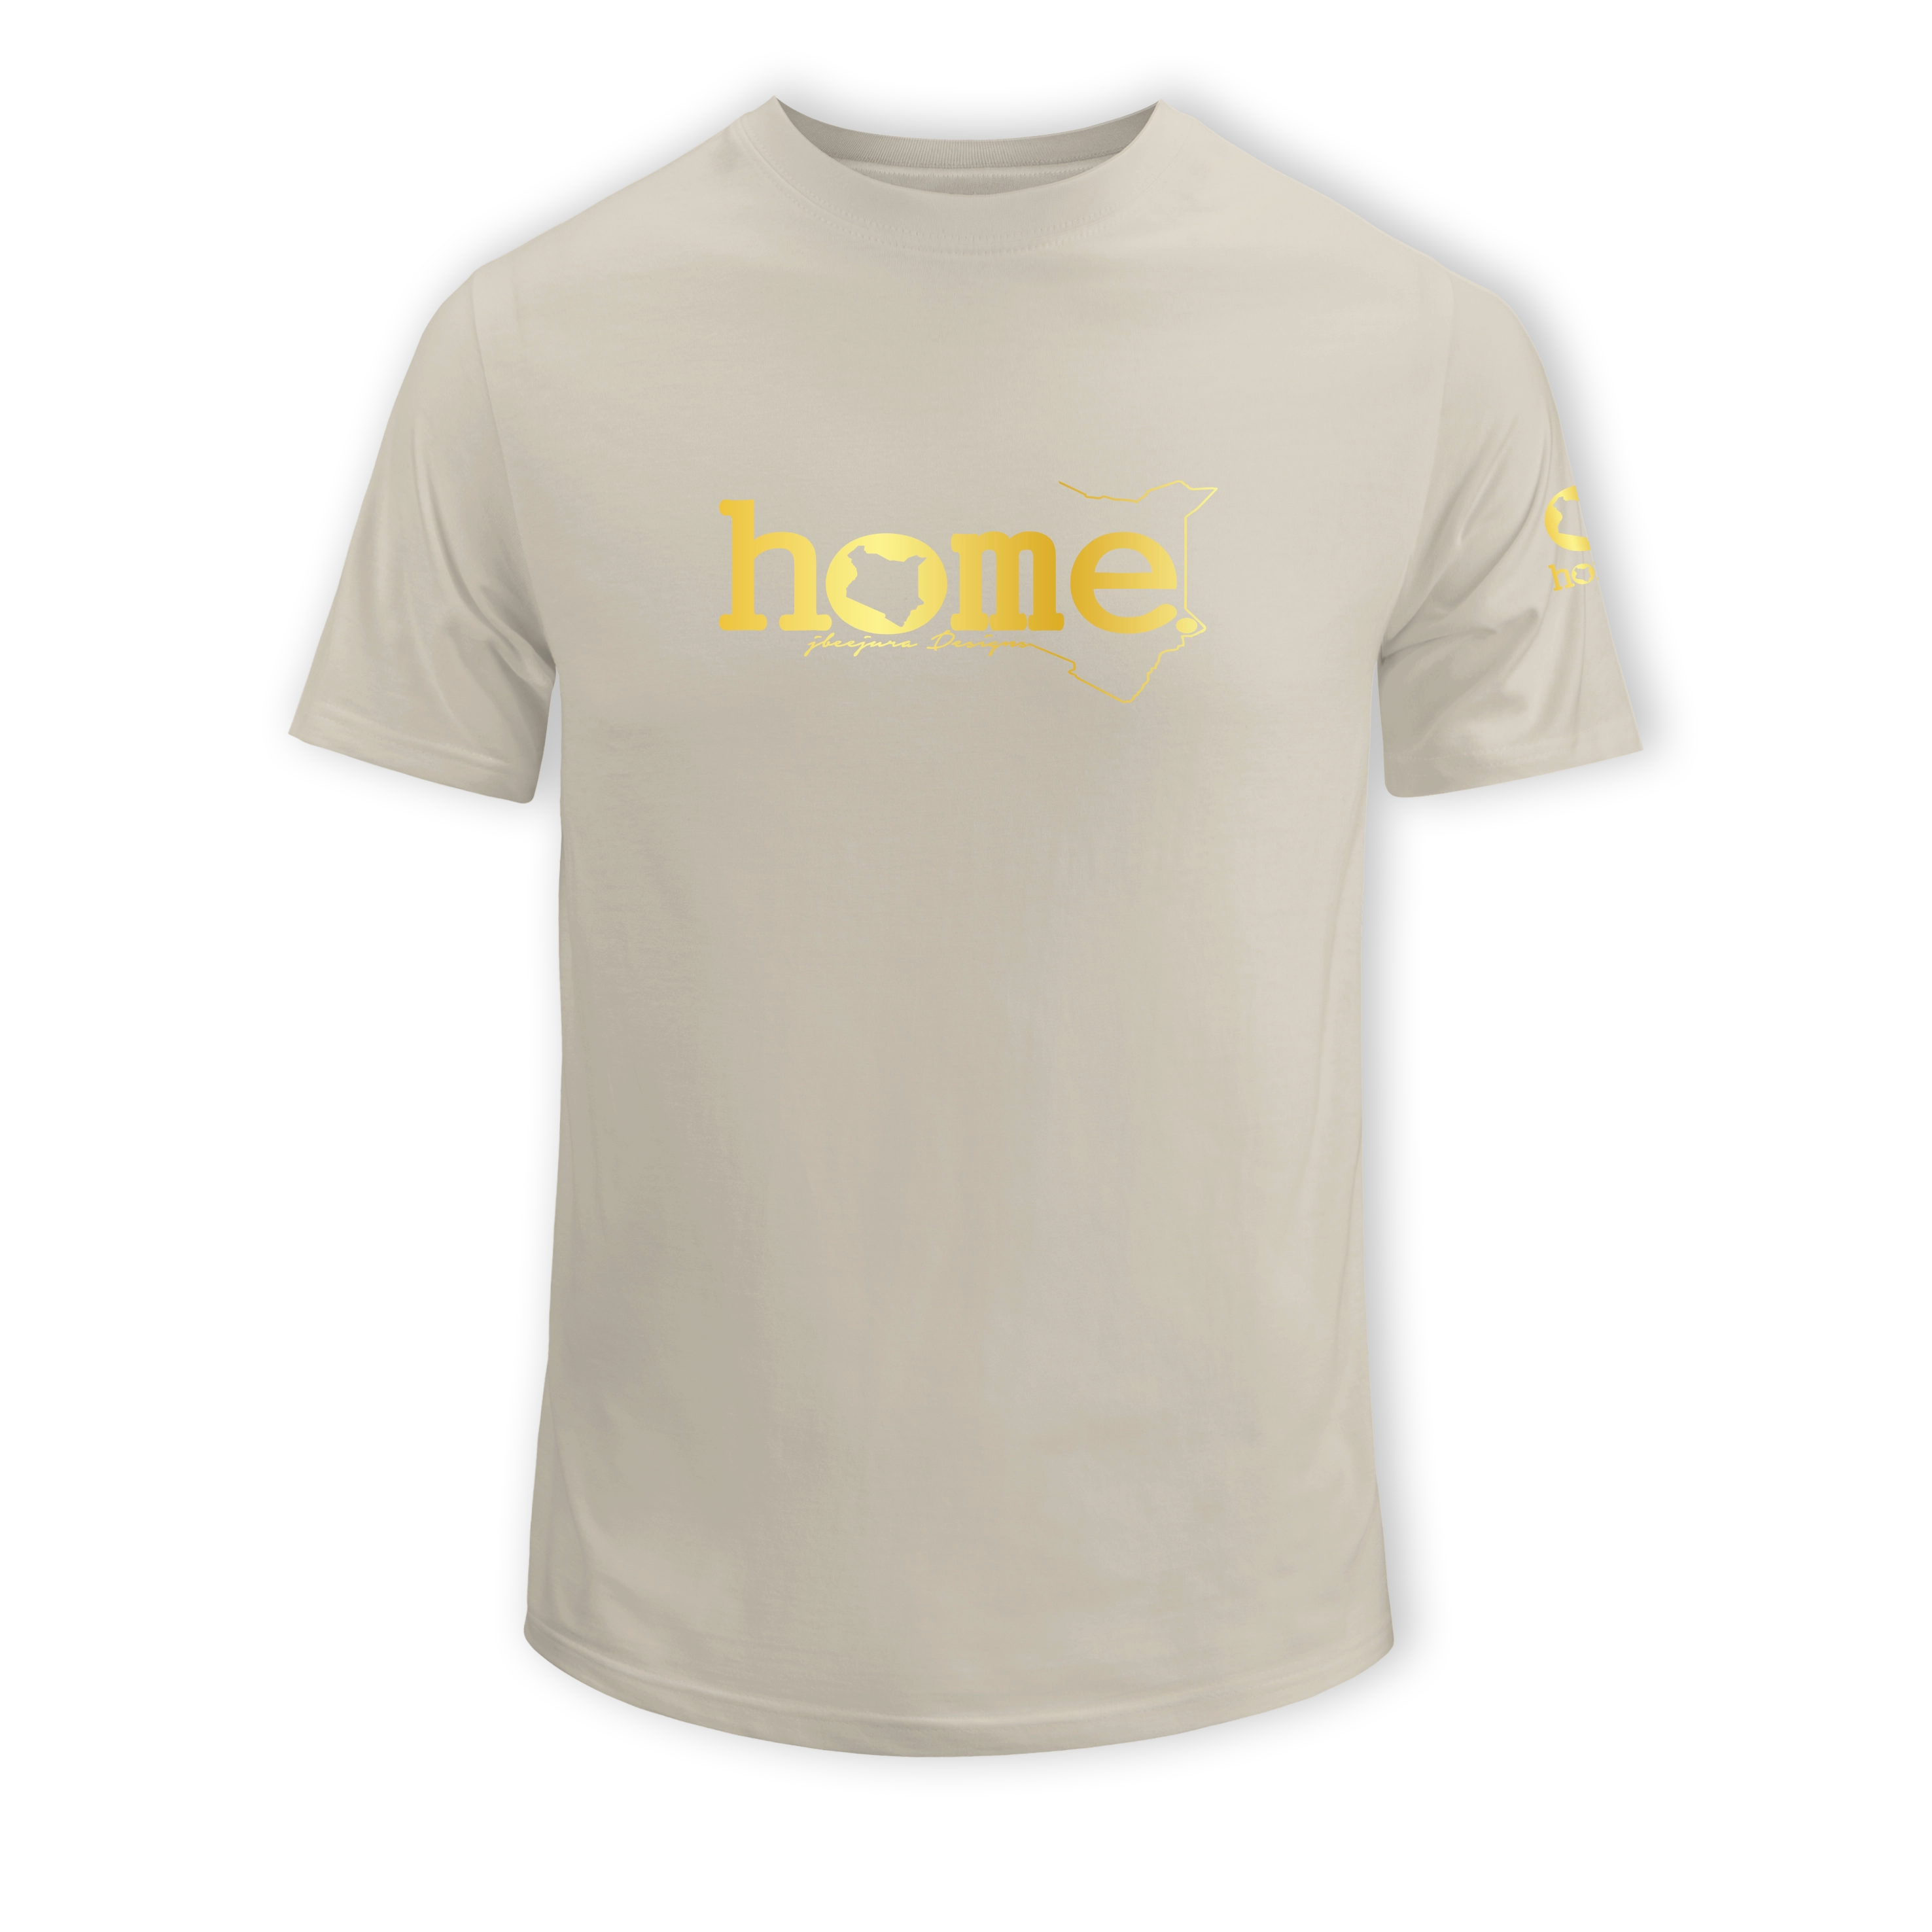 home_254 KIDS SHORT-SLEEVED NUDE T-SHIRT WITH A GOLD CLASSIC WORDS PRINT – COTTON PLUS FABRIC